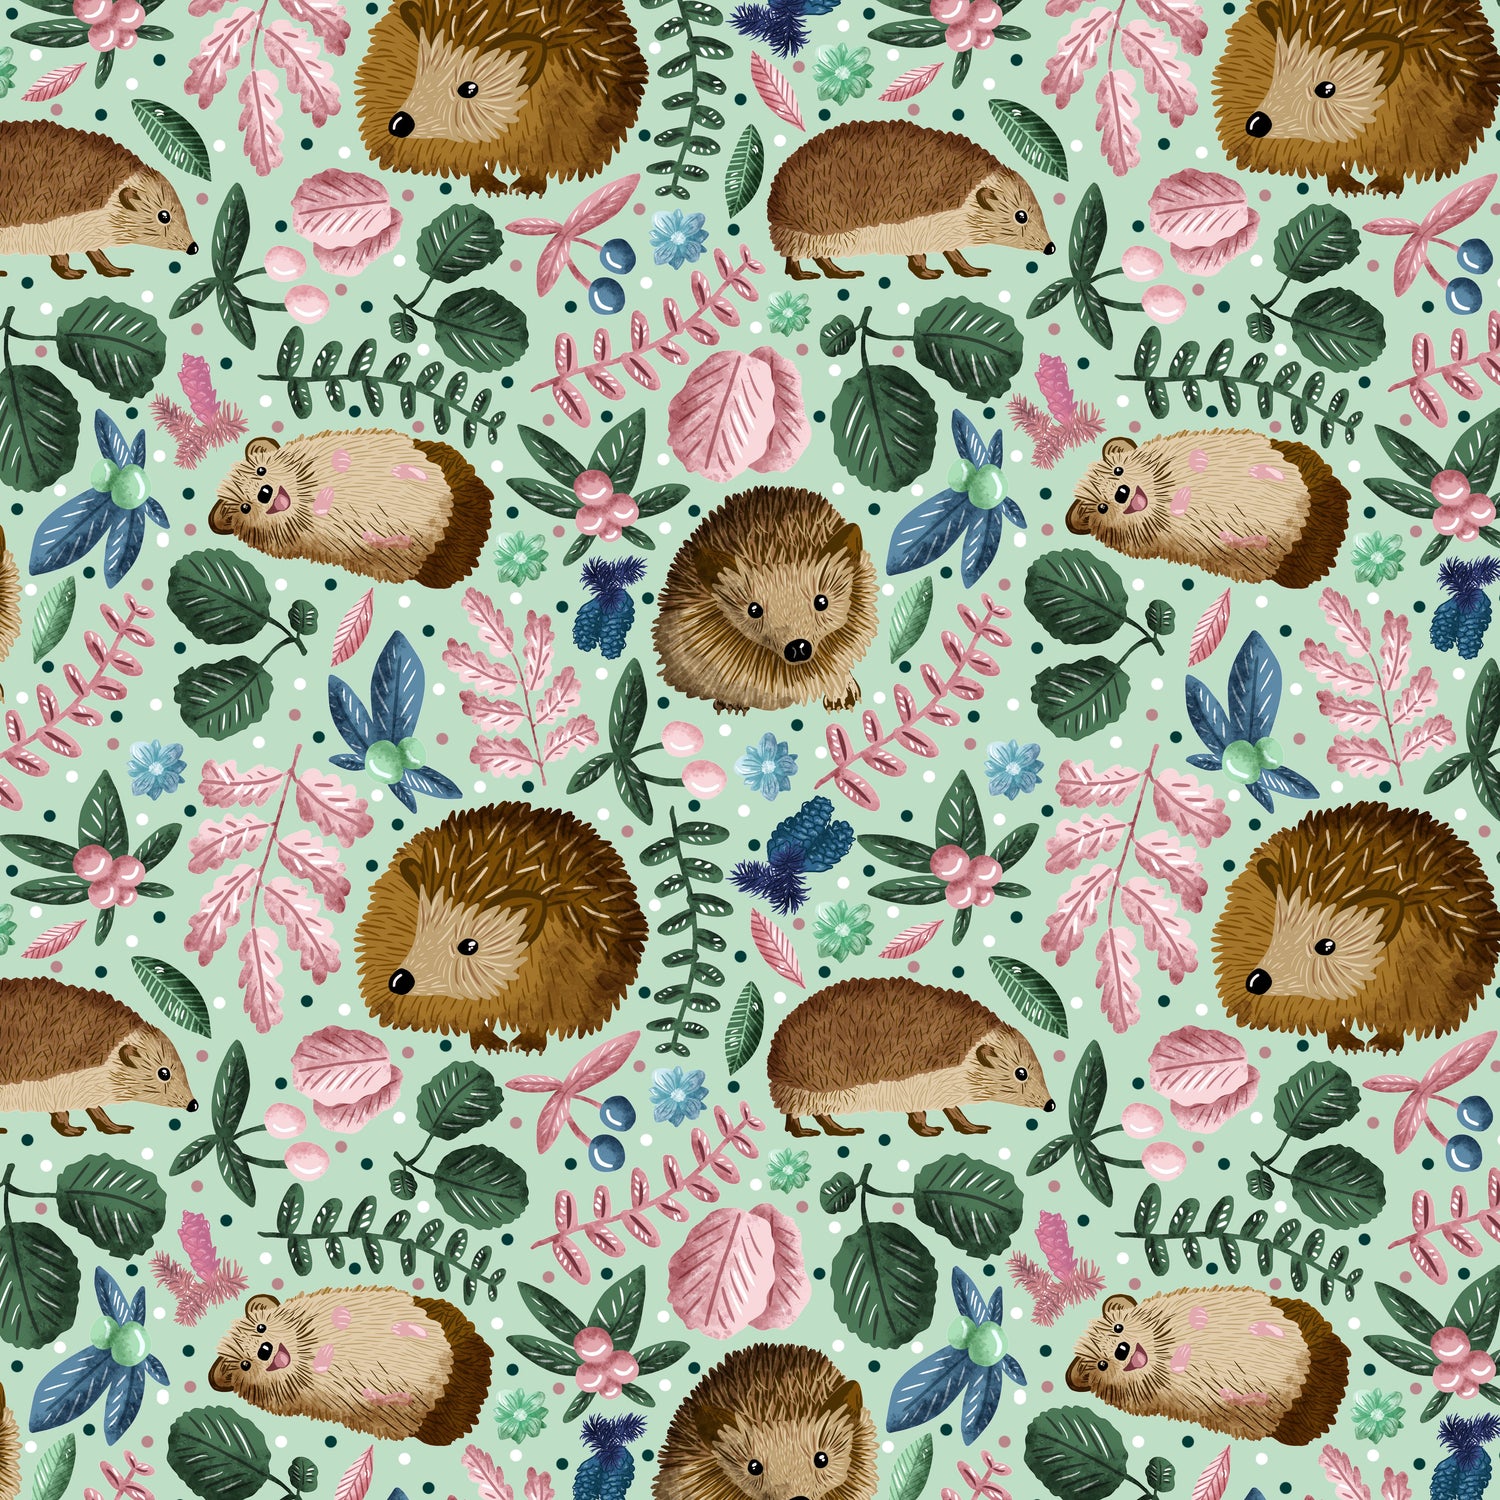 hedgehog surface pattern design as a seamless repeat with green background